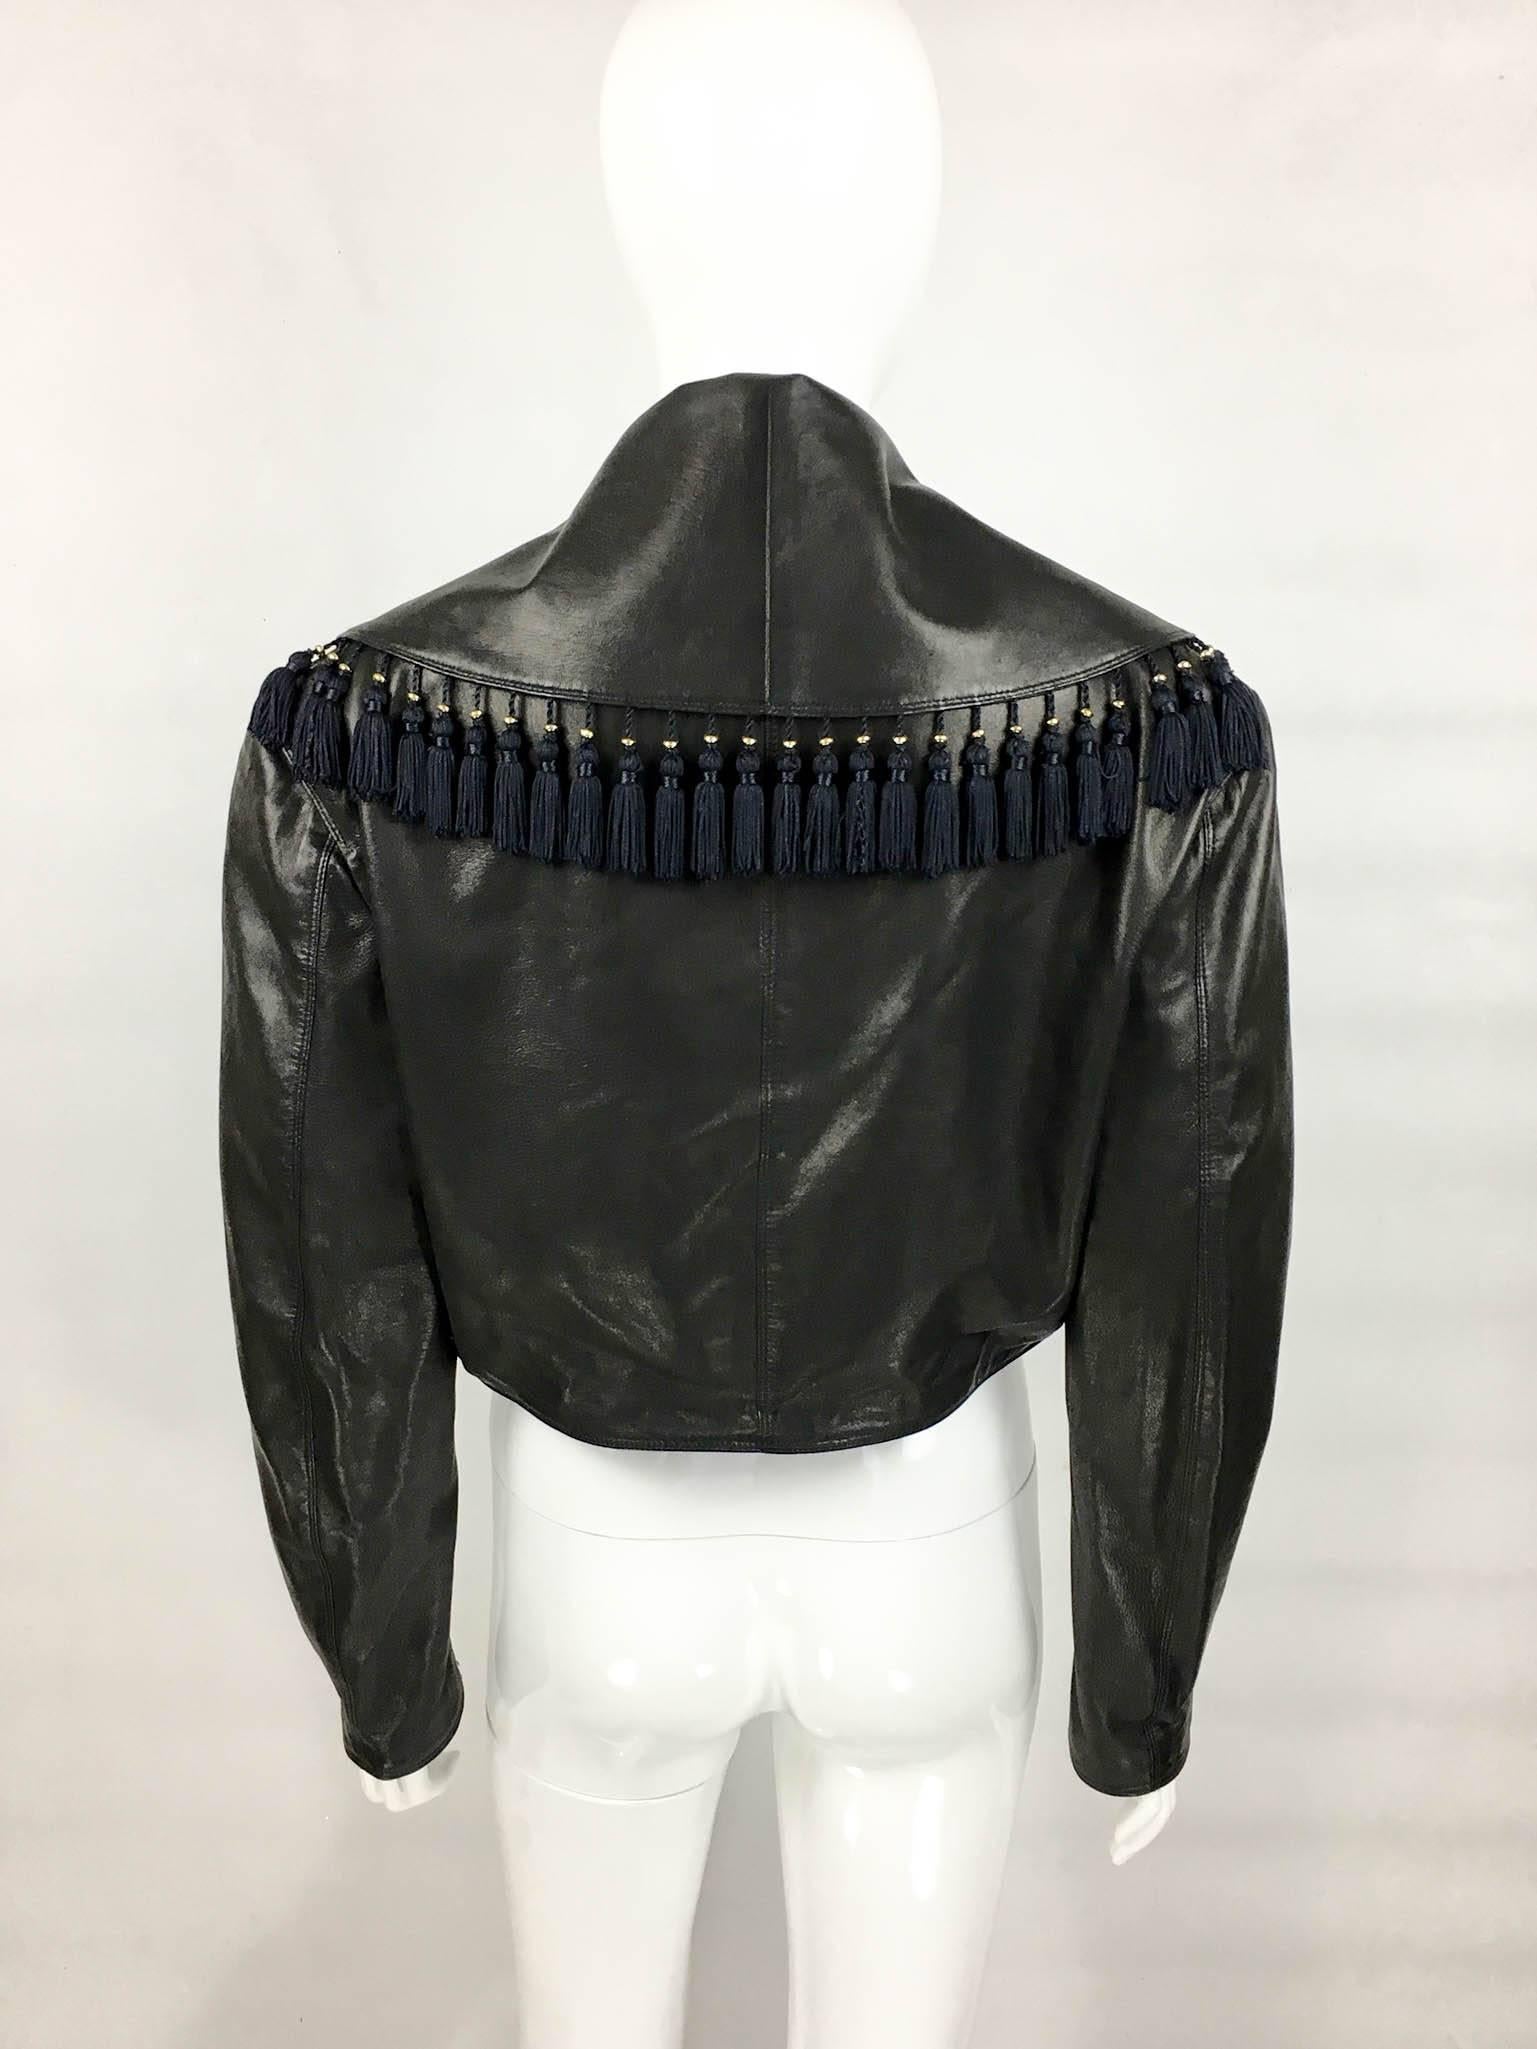 Gianni Versace Black Leather Jacket With Tassel Embellished Collar, 1980s 4